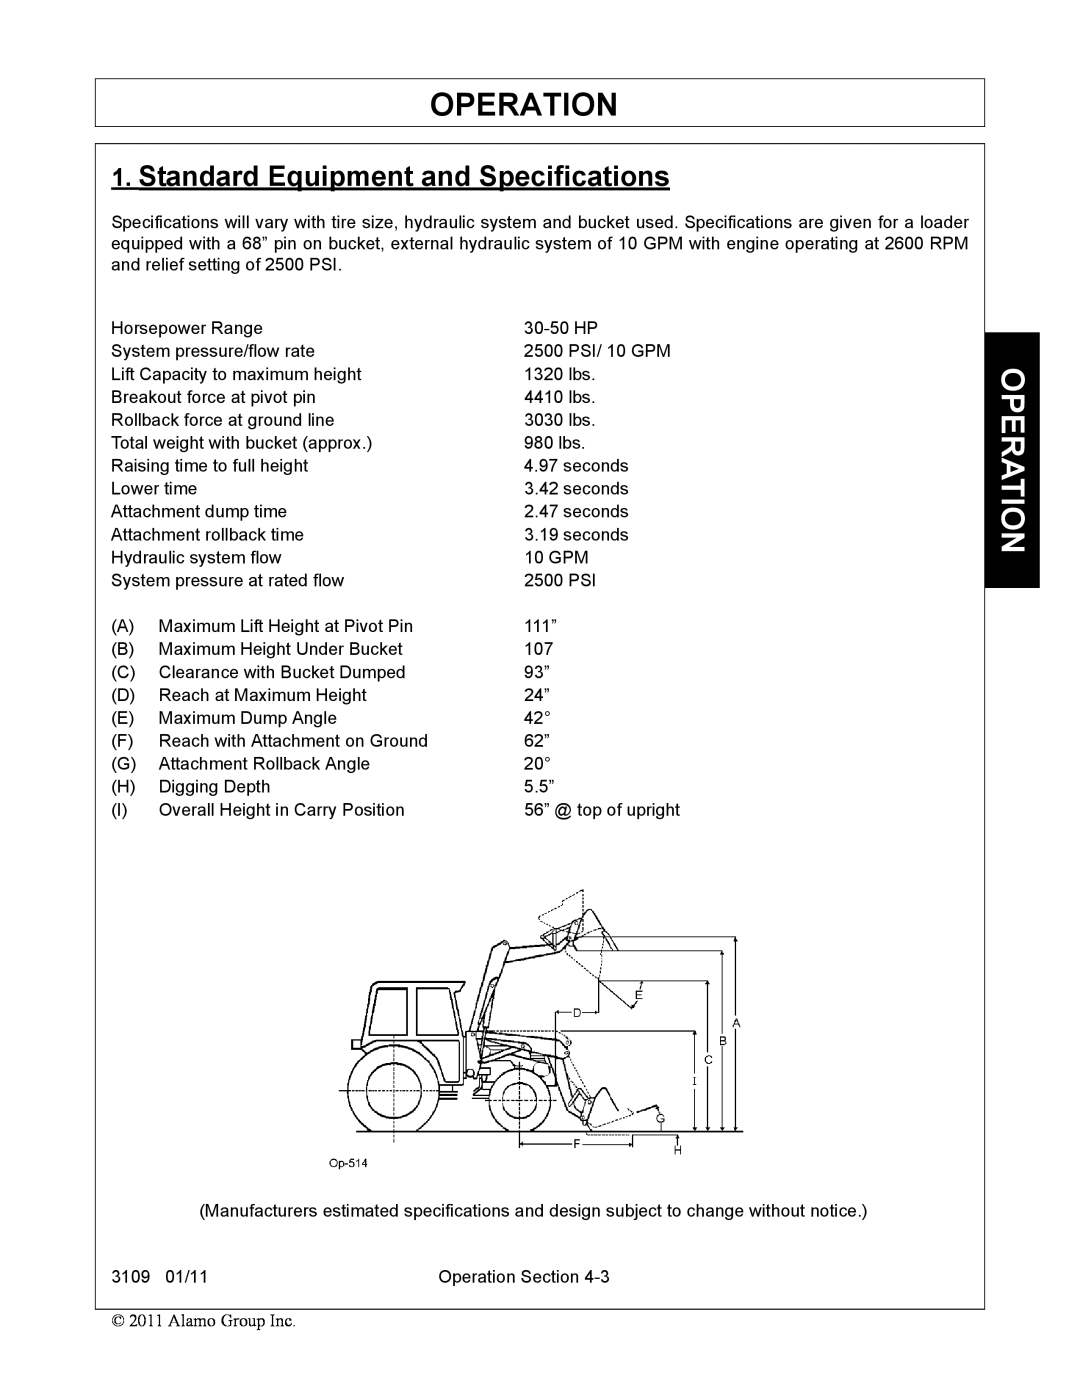 Alamo 3109 manual Operation, Standard Equipment and Specifications 